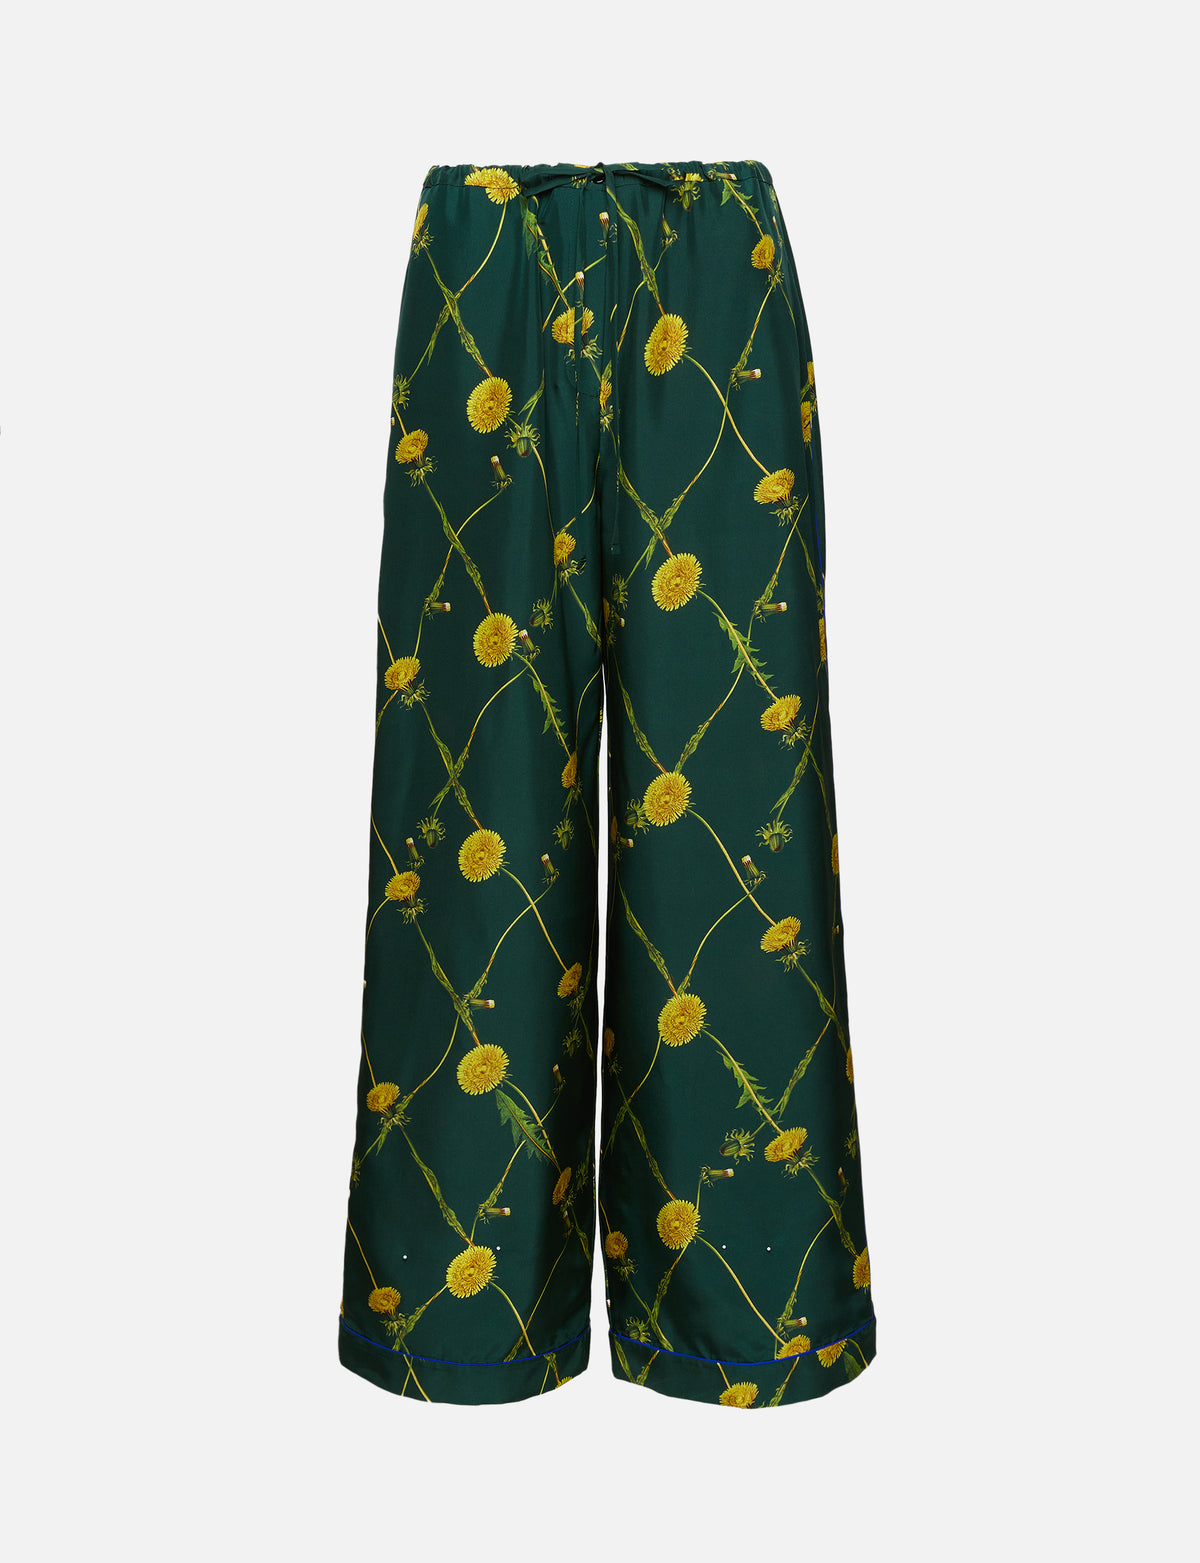 view 1 - Relaxed Pyjama Trouser